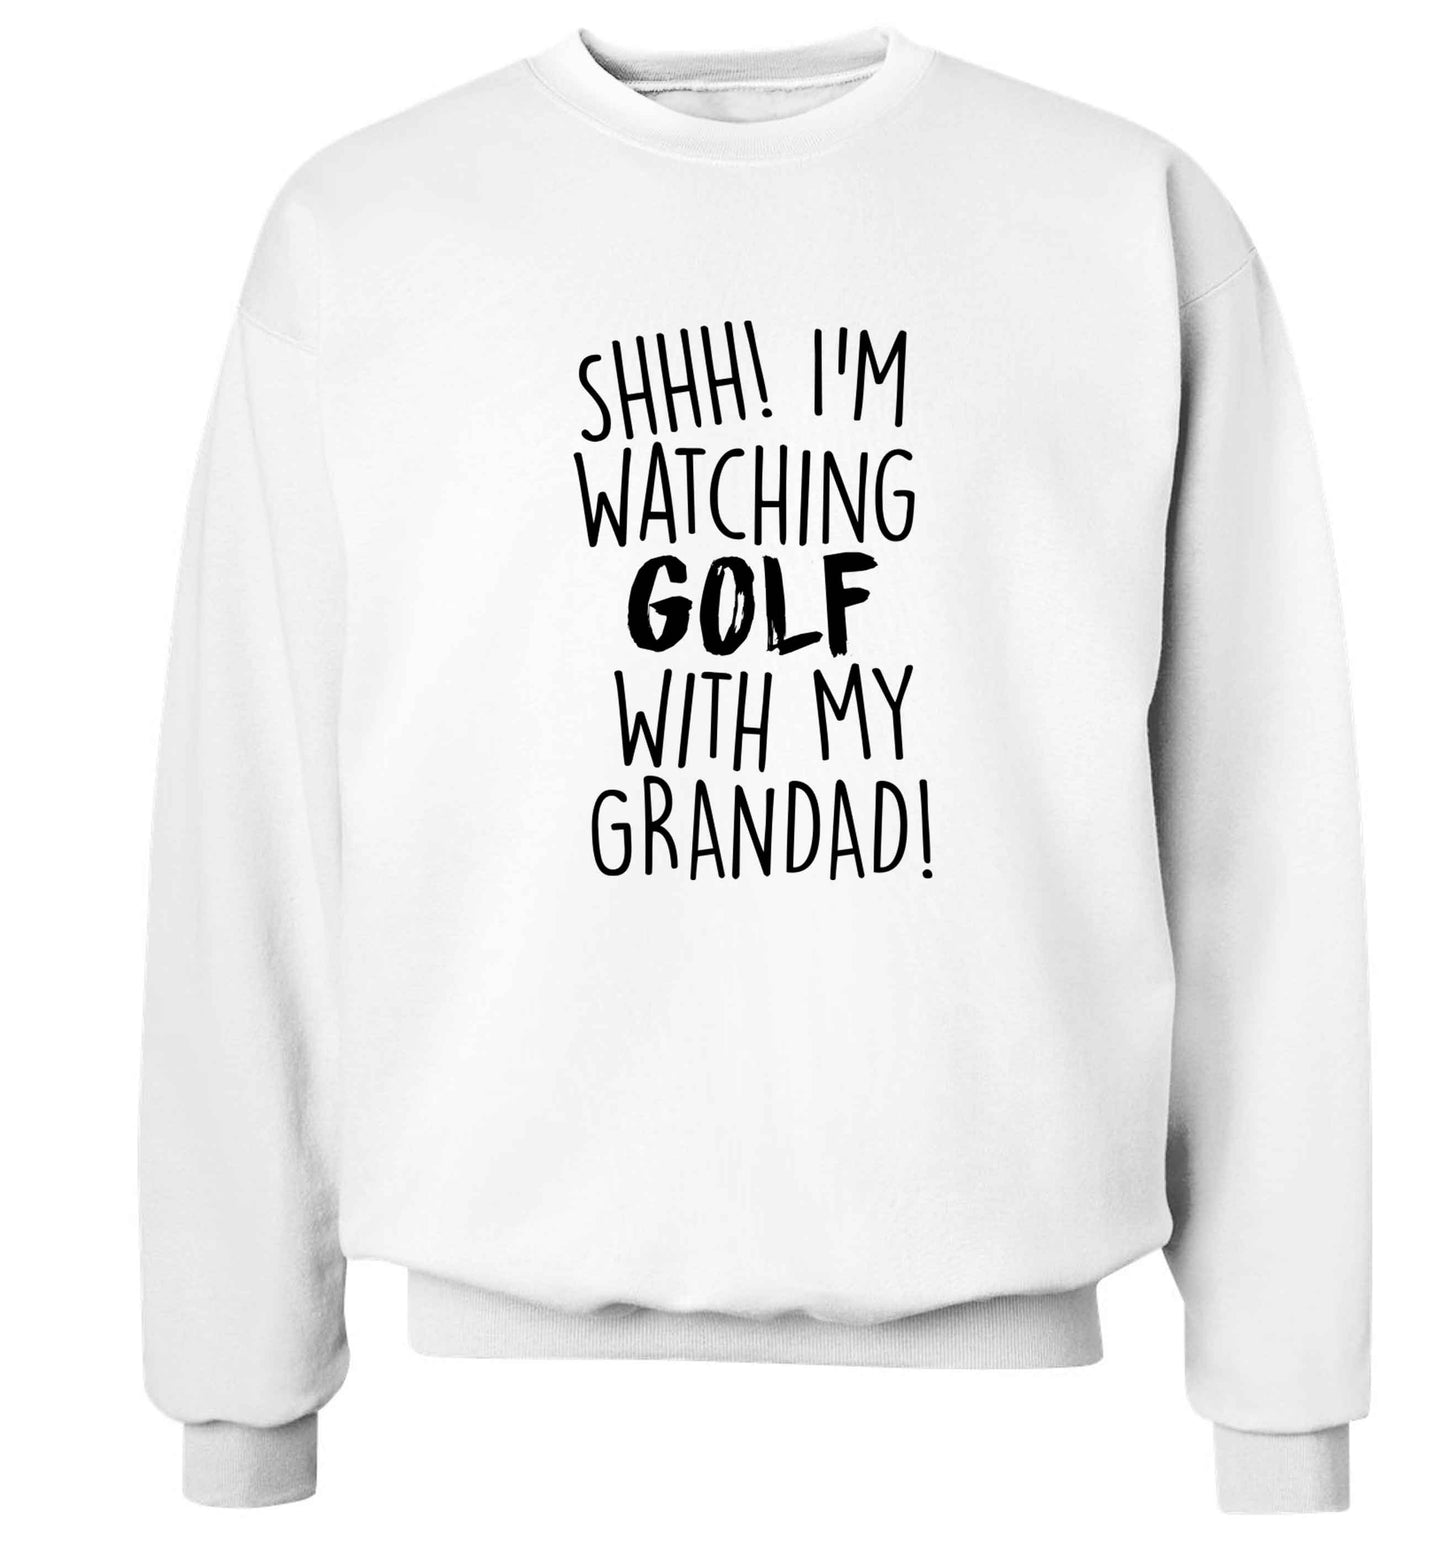 Shh I'm watching golf with my grandad Adult's unisex white Sweater 2XL